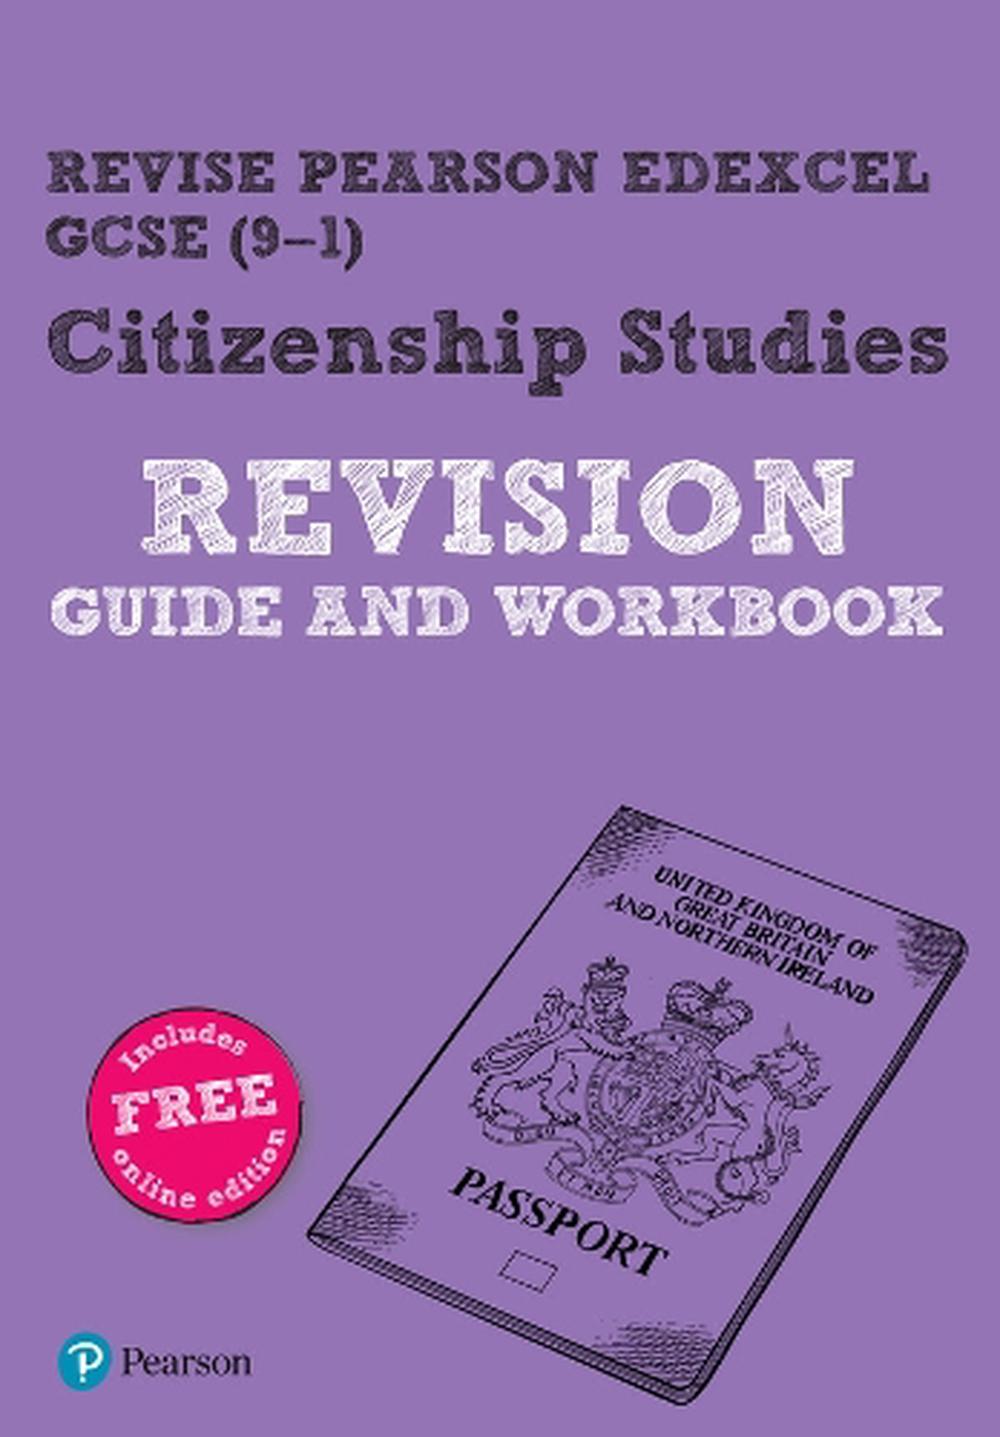 Pearson Revise Edexcel Gcse 9 1 Citizenship Revision Guide Workbook For Home Learning 21 Assessments And 22 Exams By Graeme Roffe Book Merchandise Buy Online At The Nile